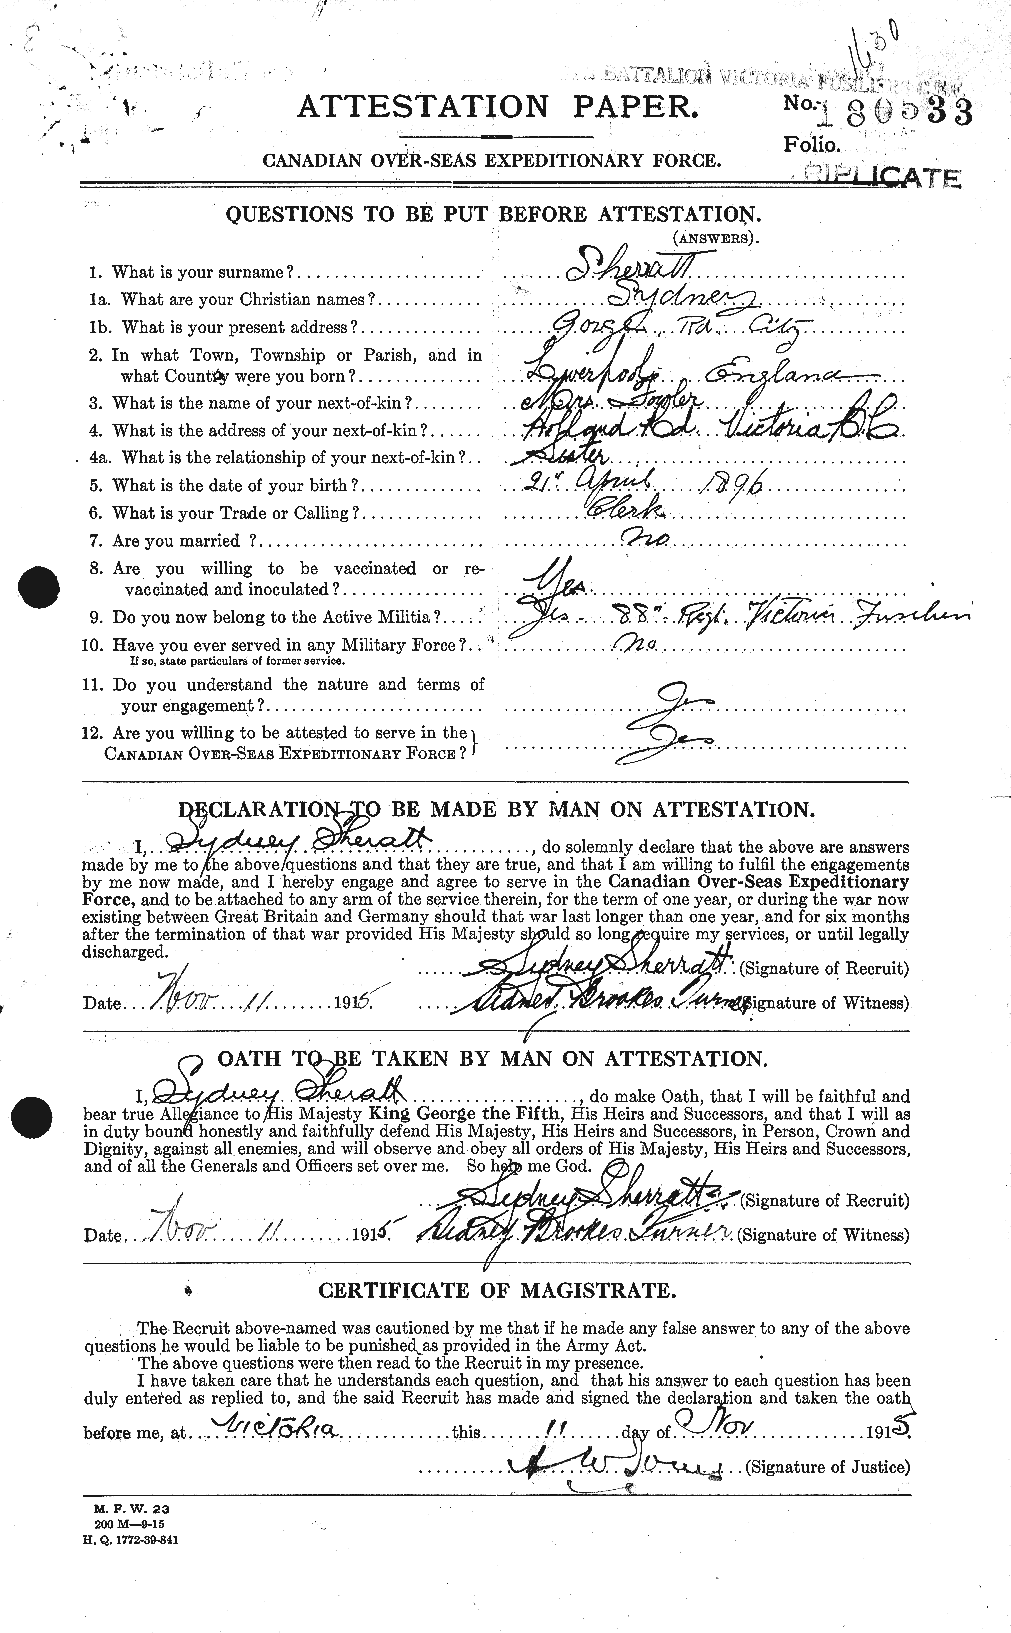 Personnel Records of the First World War - CEF 092532a